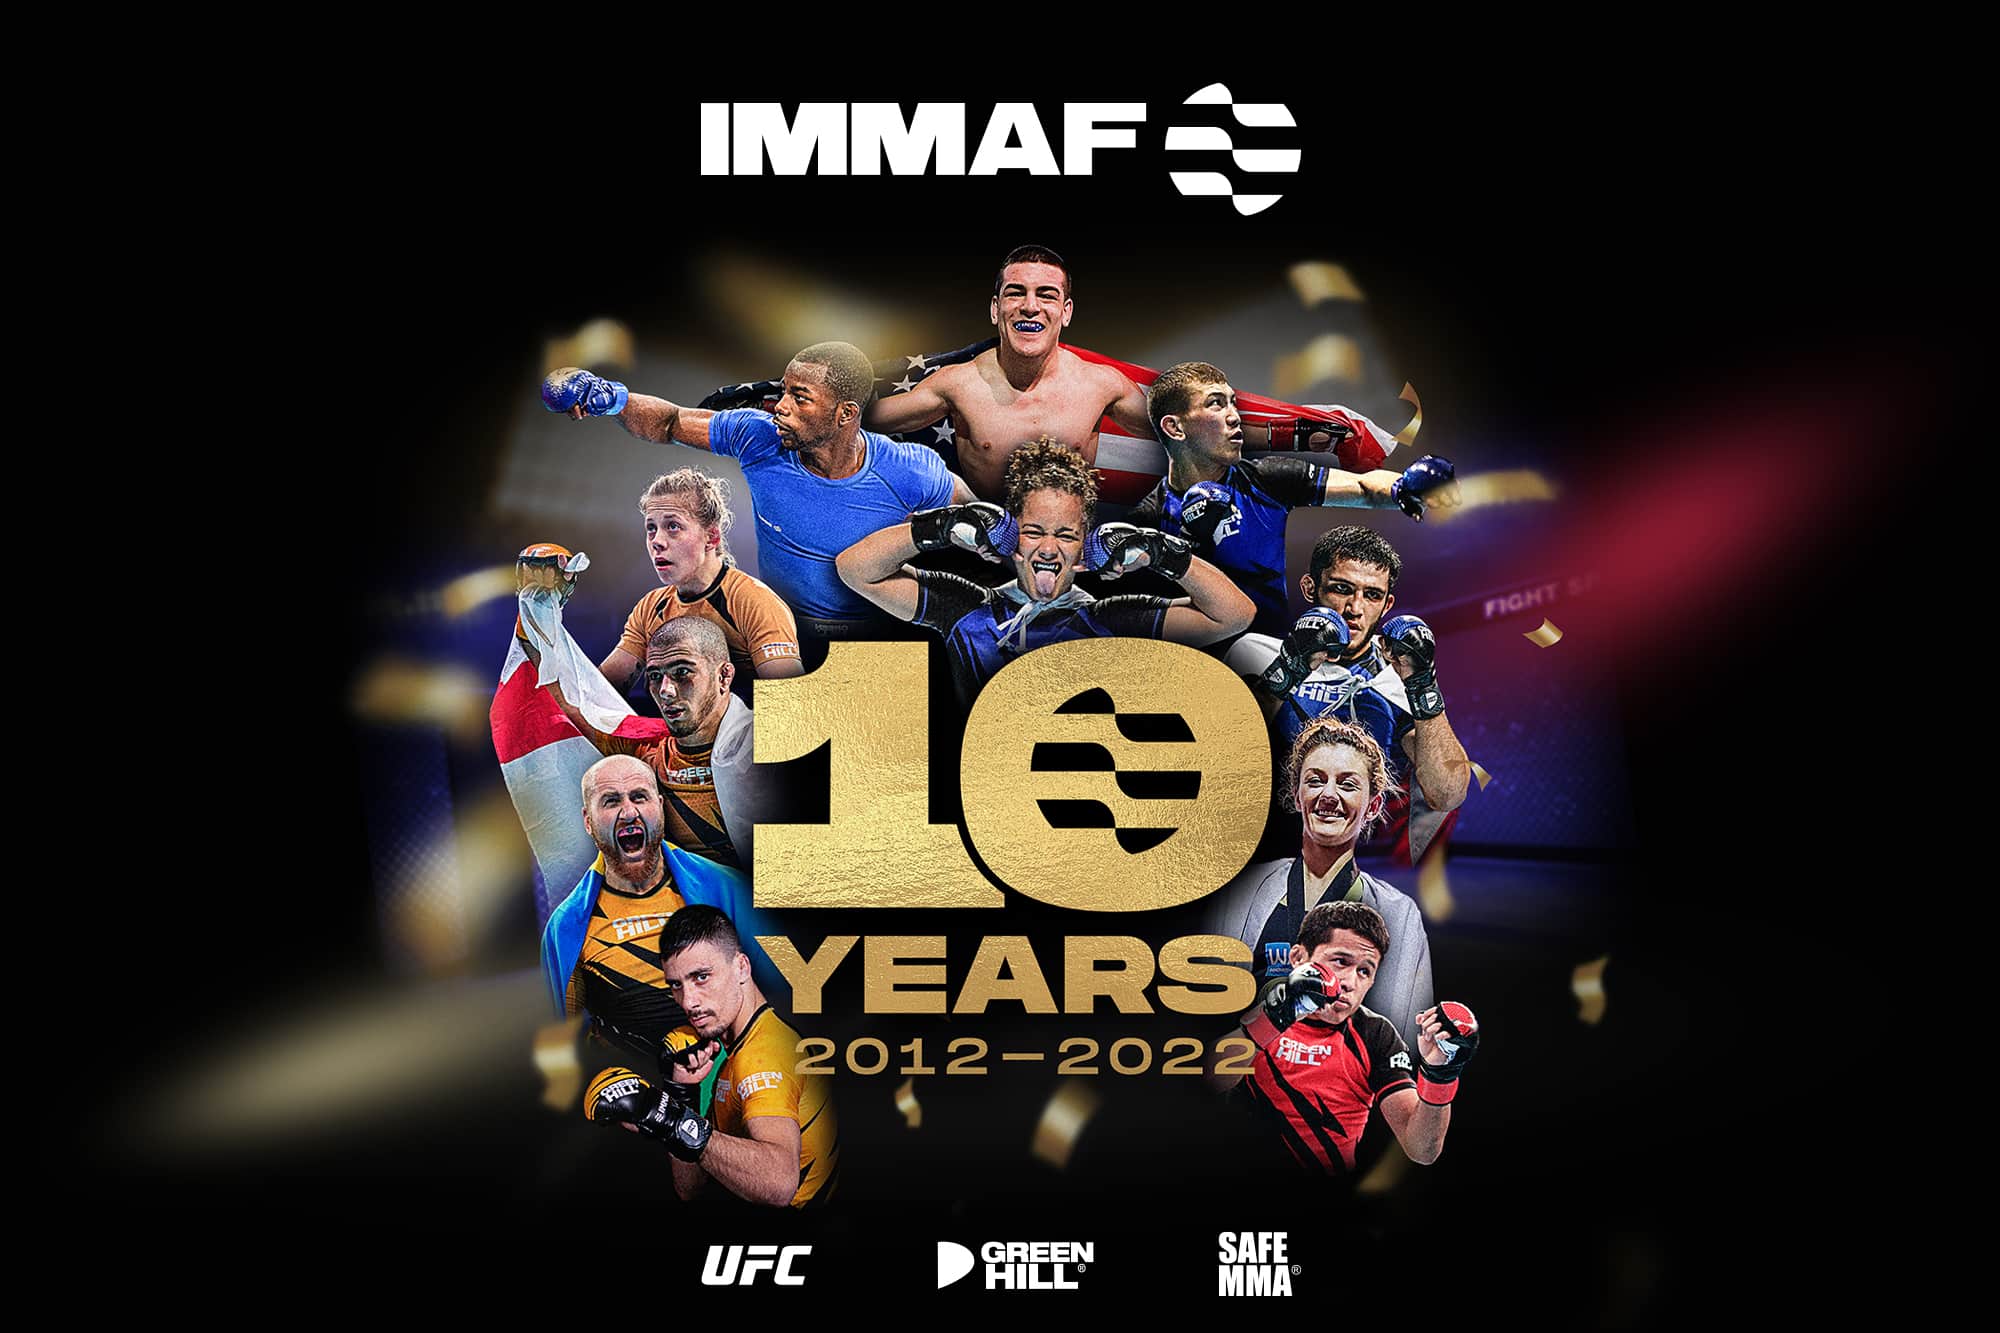 IMMAF launches 10 Year anniversary video series with Episode 1 – The Beginning